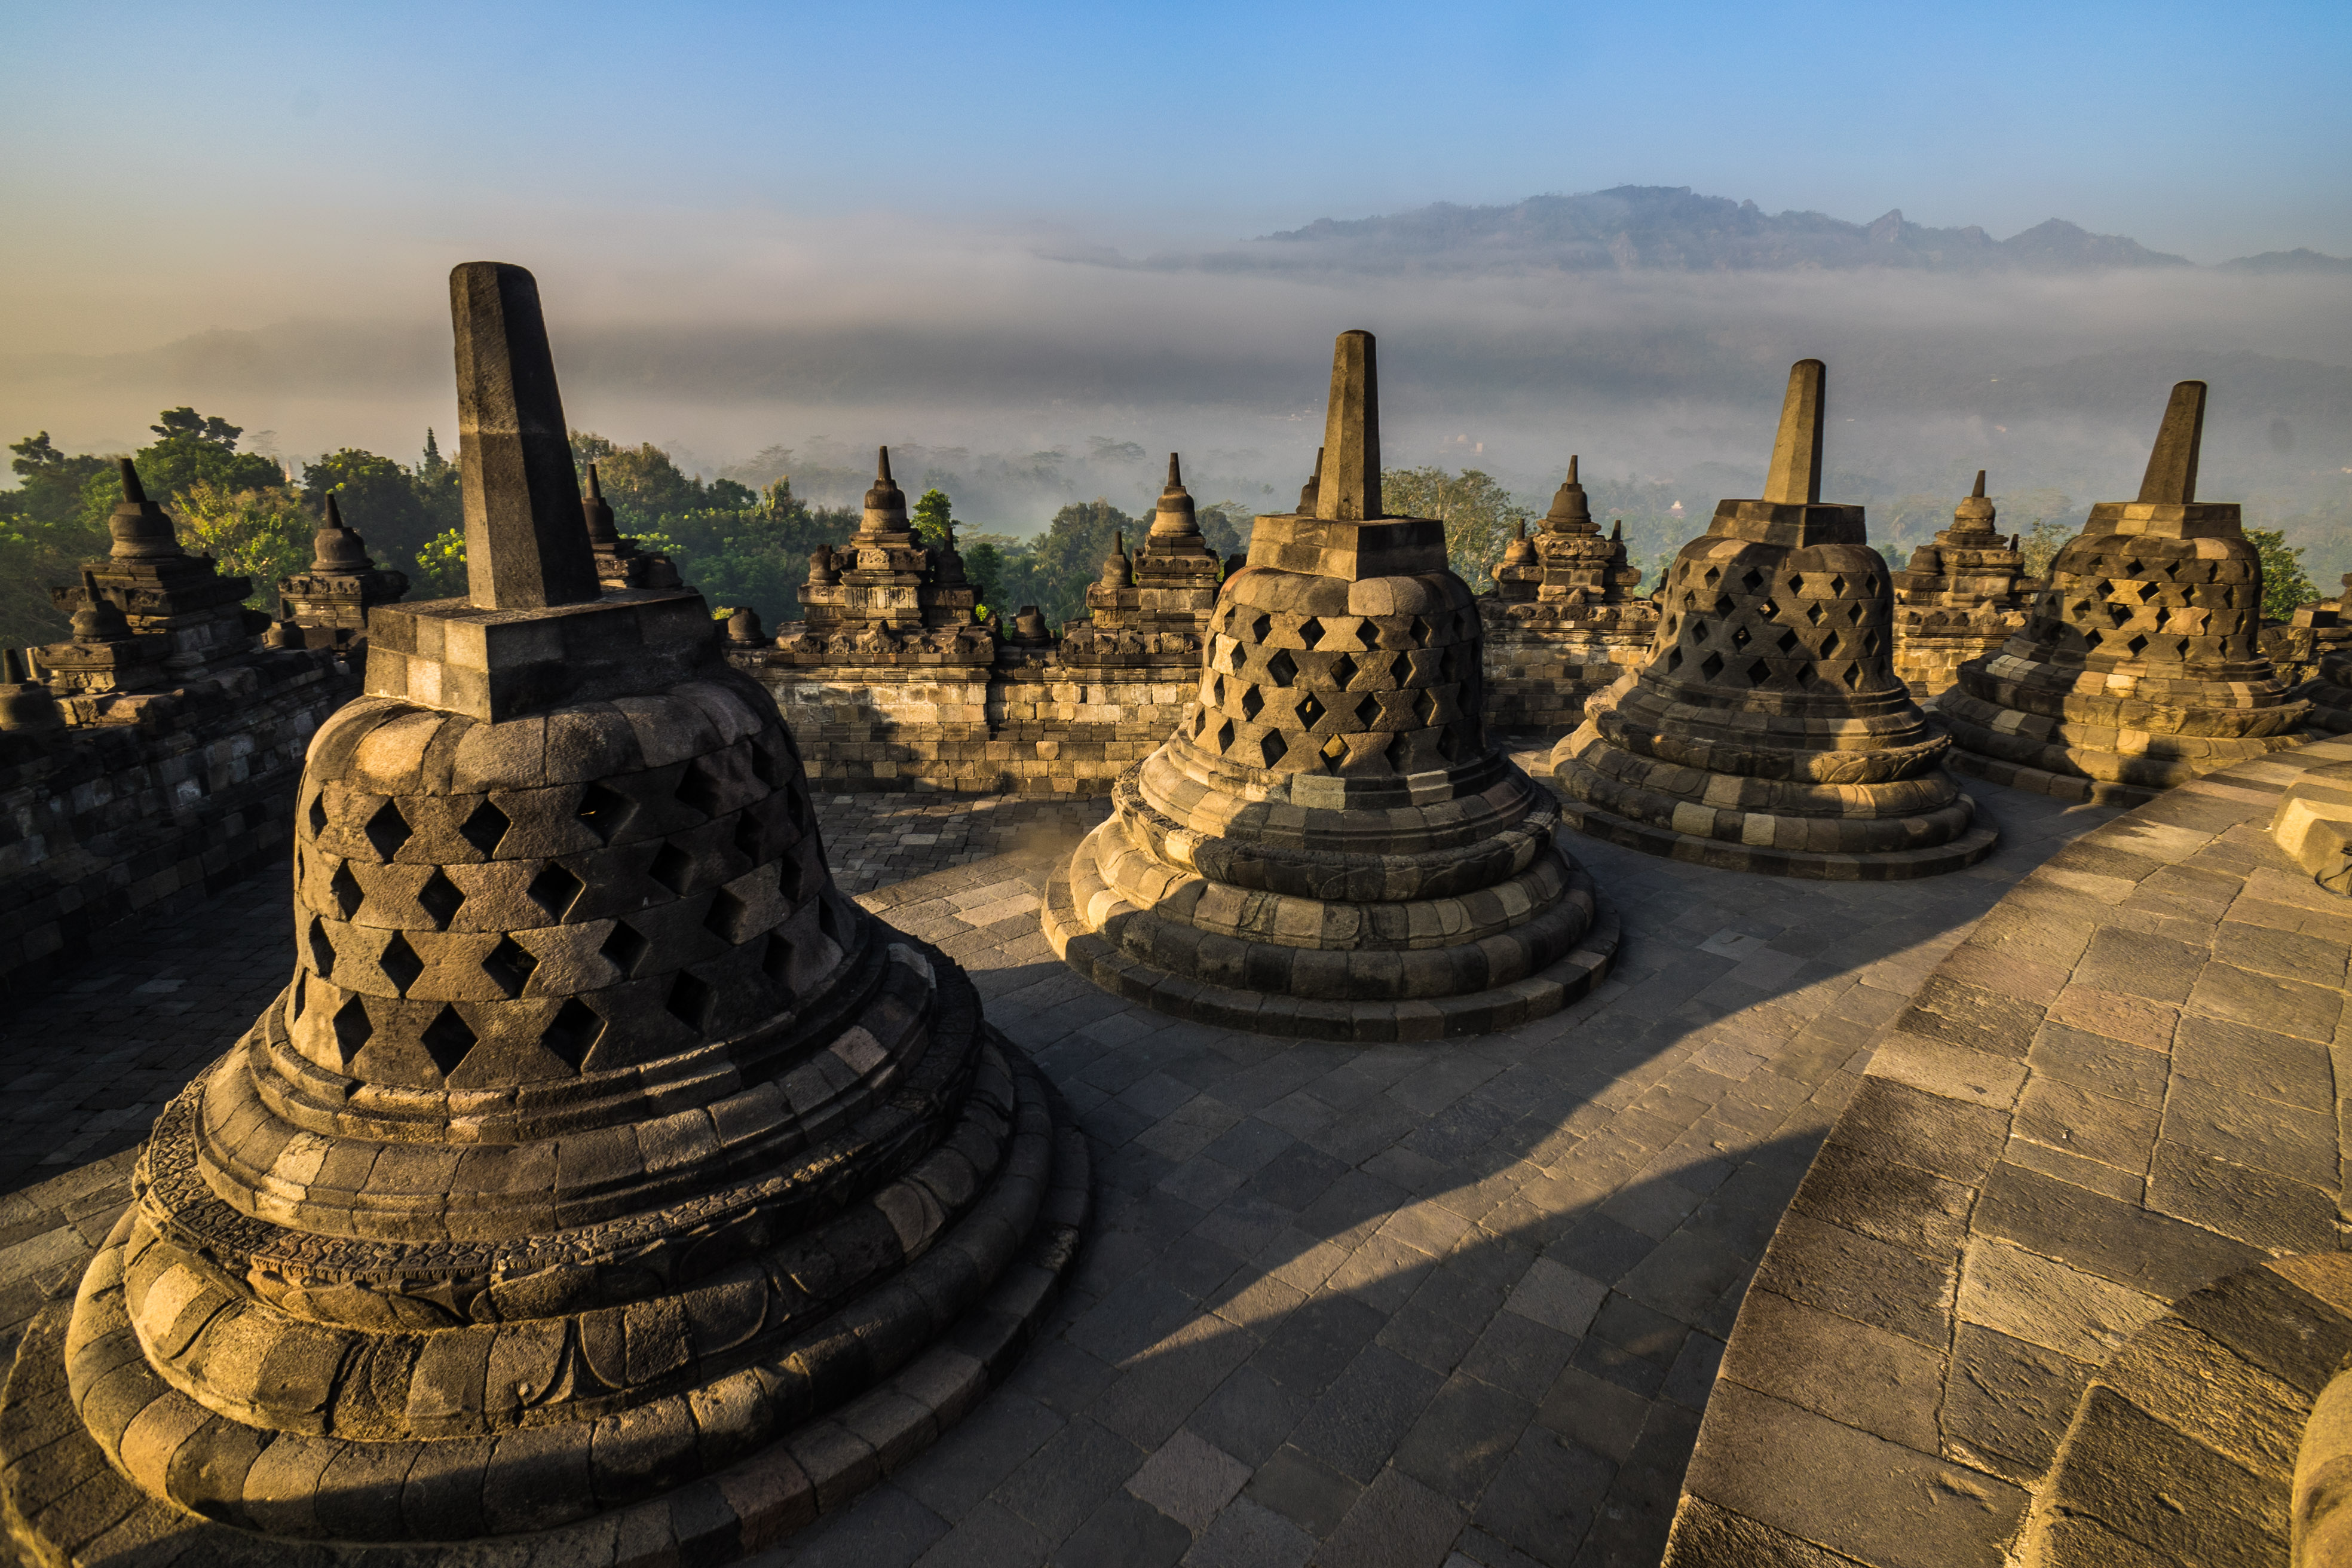 Indonesia Day 16:  The largest temple, Borobudur and Ramayana, an epic poem